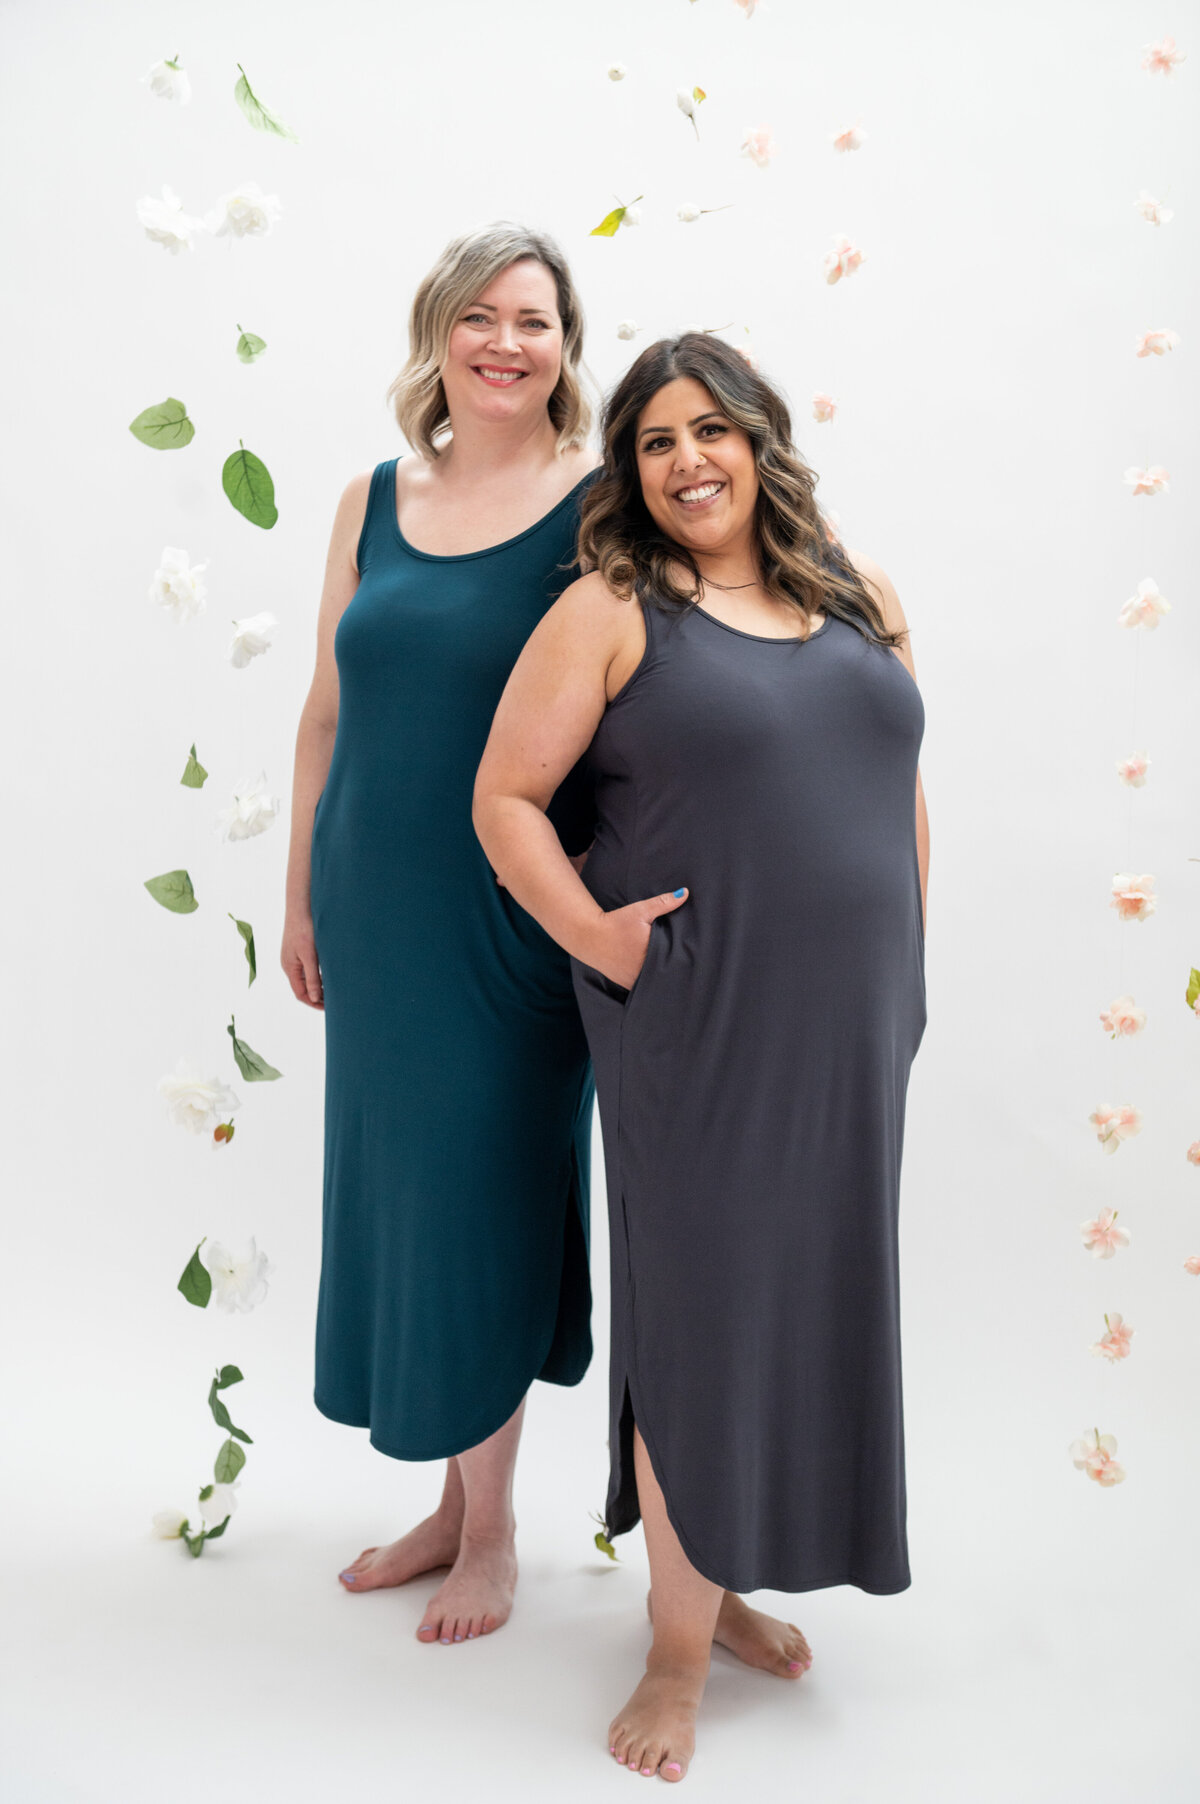 Listing photo of two women wearing maxi dresses on a flower backdrop